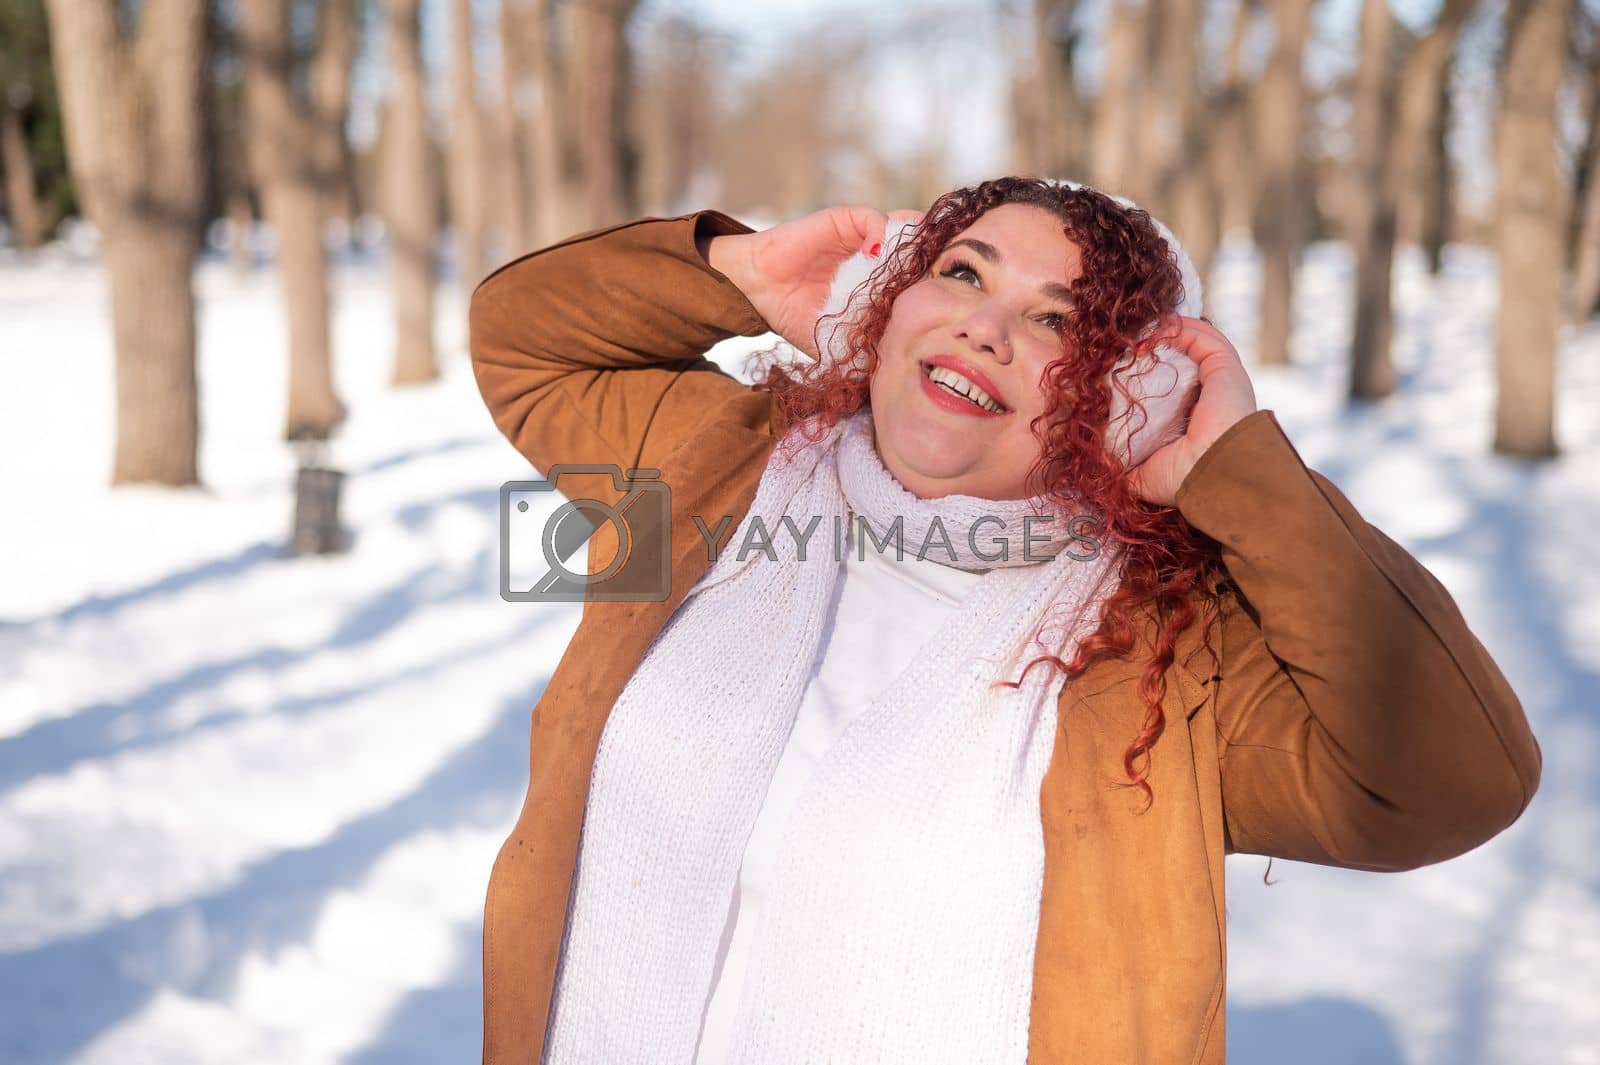 Royalty free image of Cheerful fat caucasian woman in fur headphones outdoors. by mrwed54